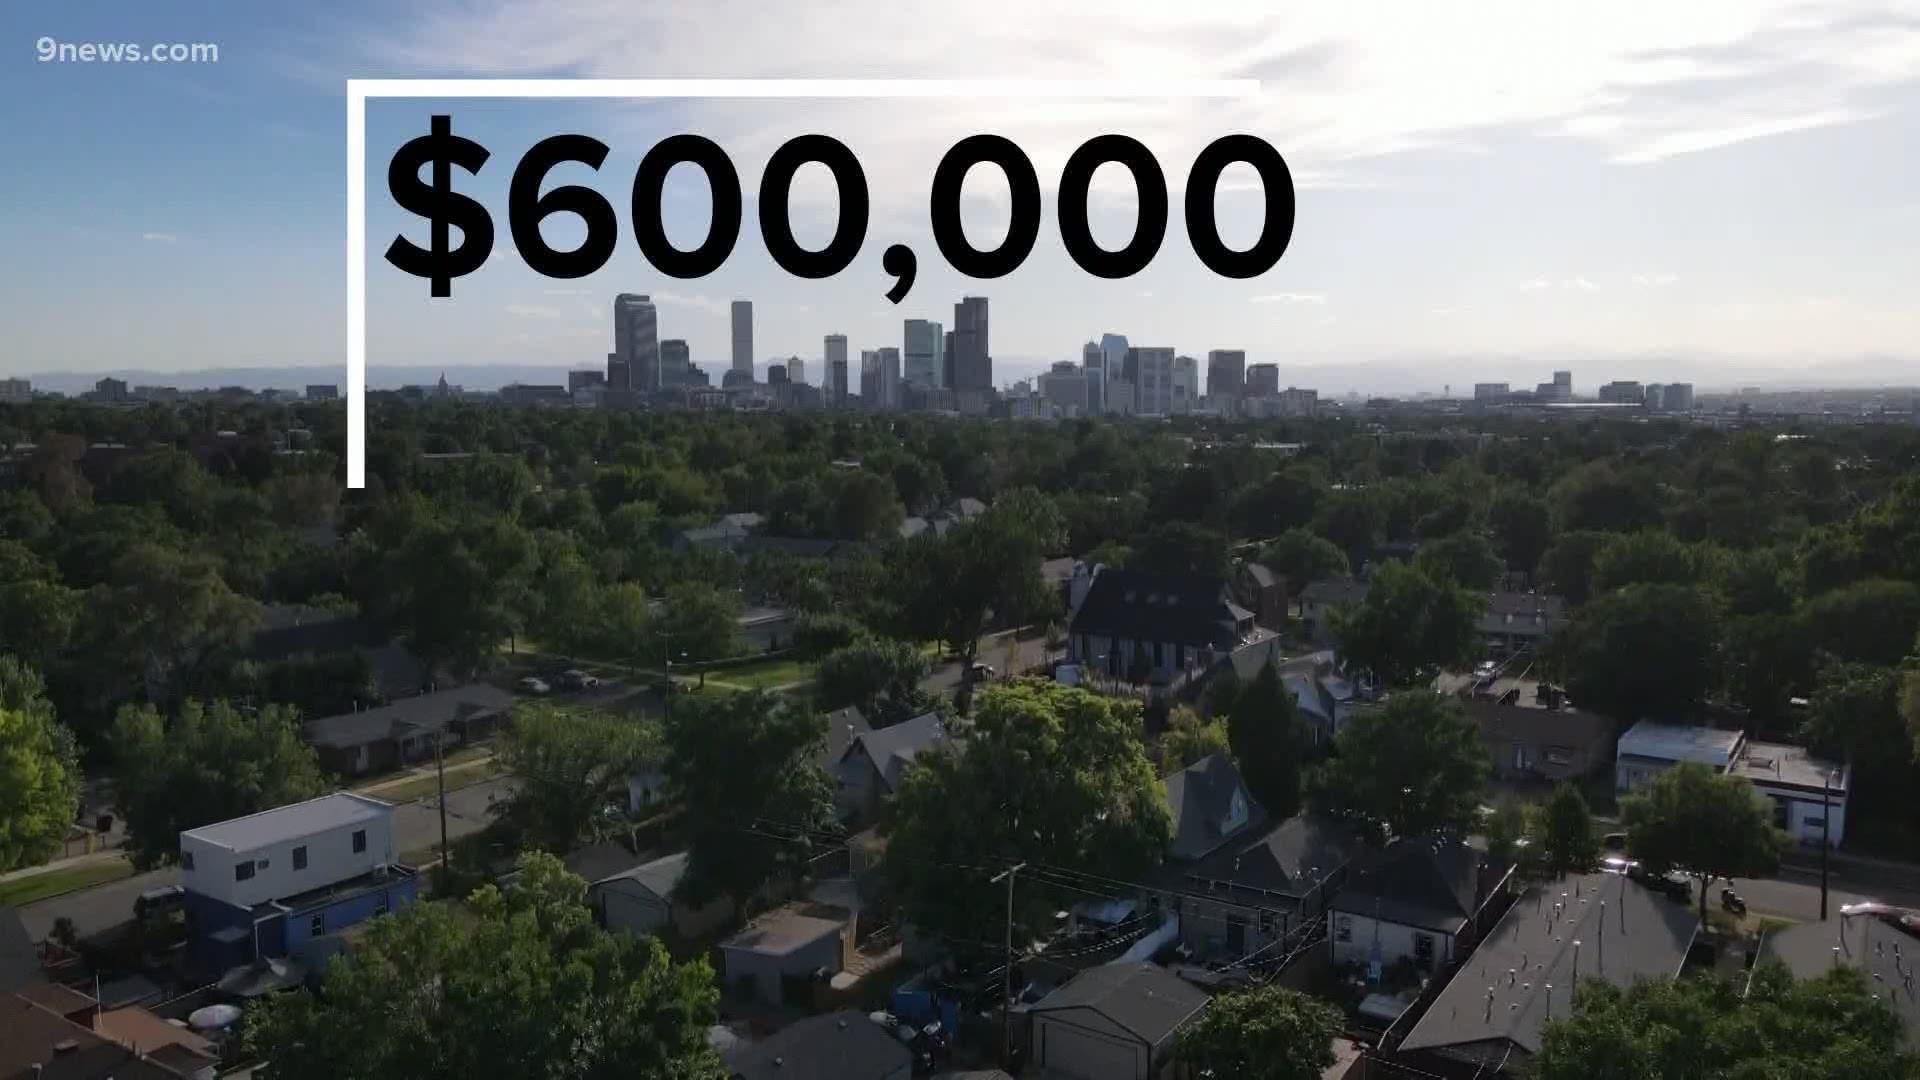 In August, 6,000 home were sold in the Denver metro area, but active listings dropped 41% over the same time last year.